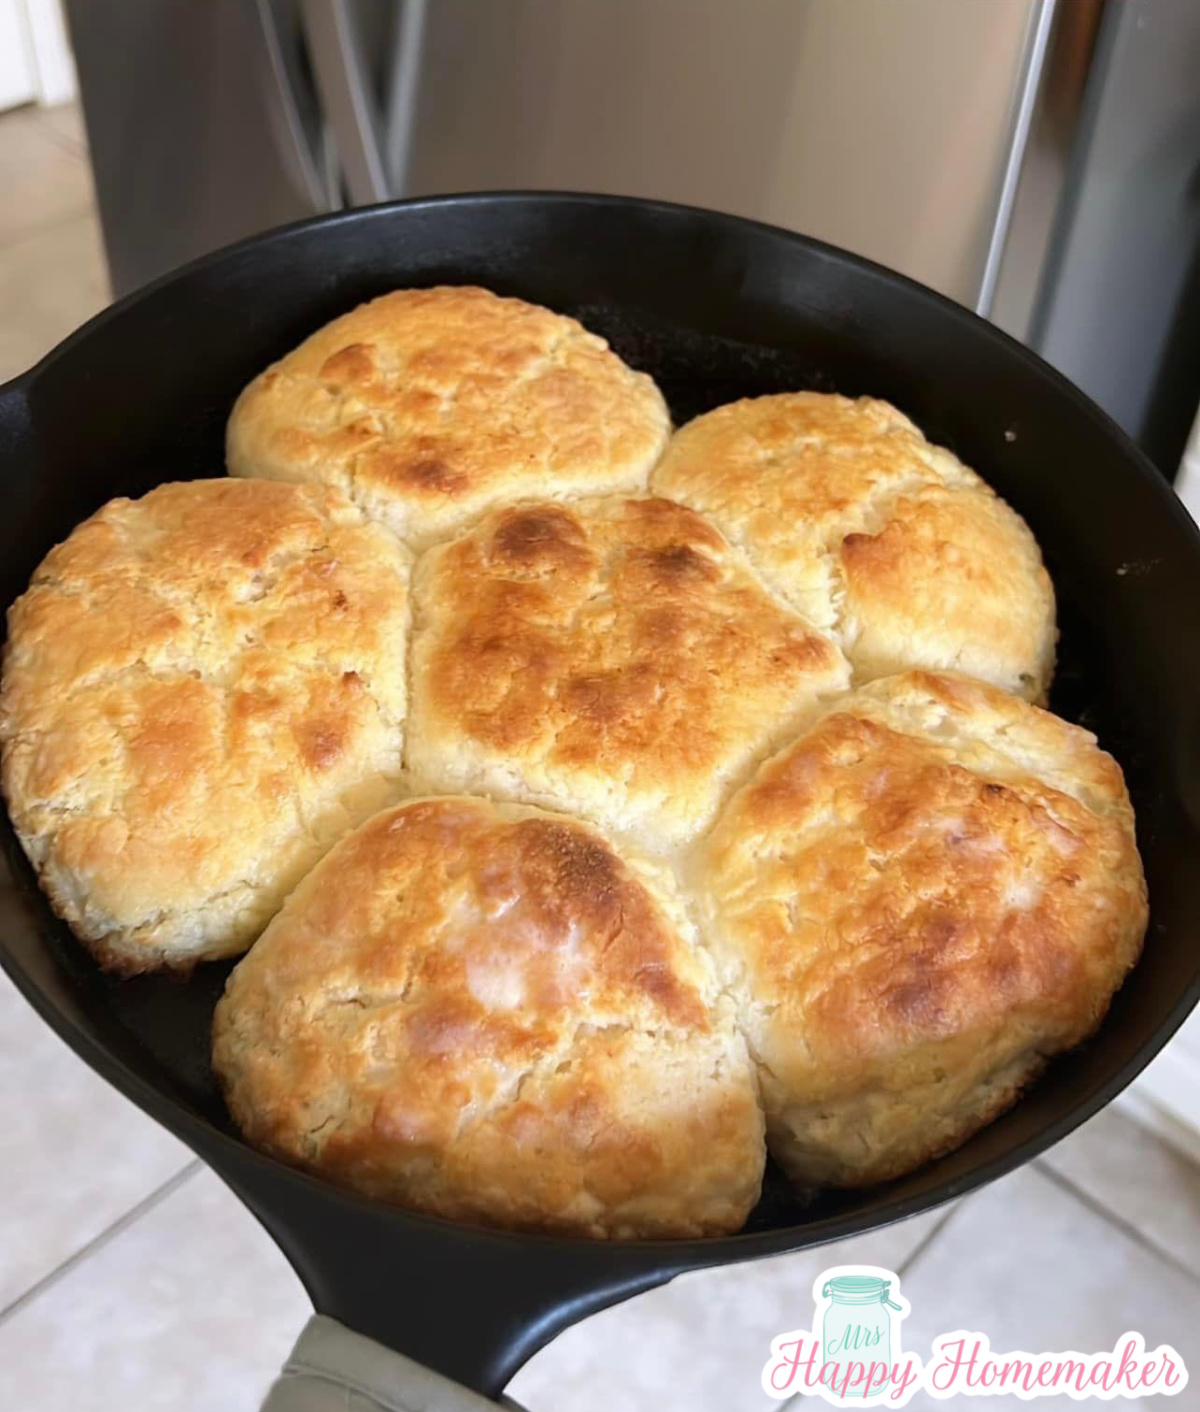 6 biscuits in a 7 inch cast iron skillet